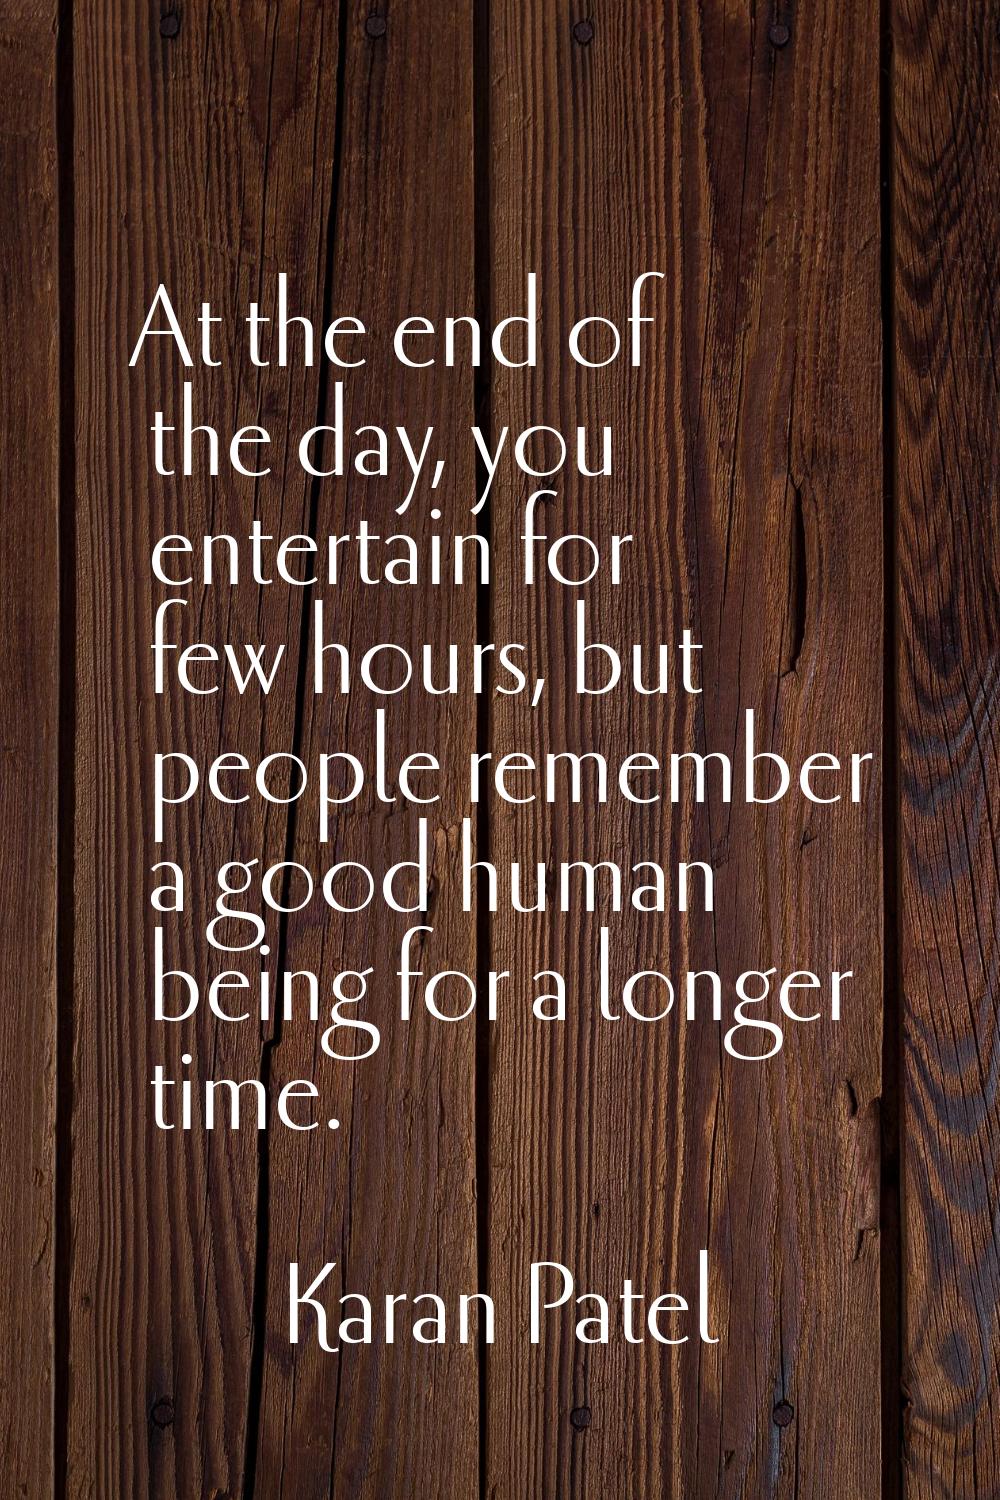 At the end of the day, you entertain for few hours, but people remember a good human being for a lo